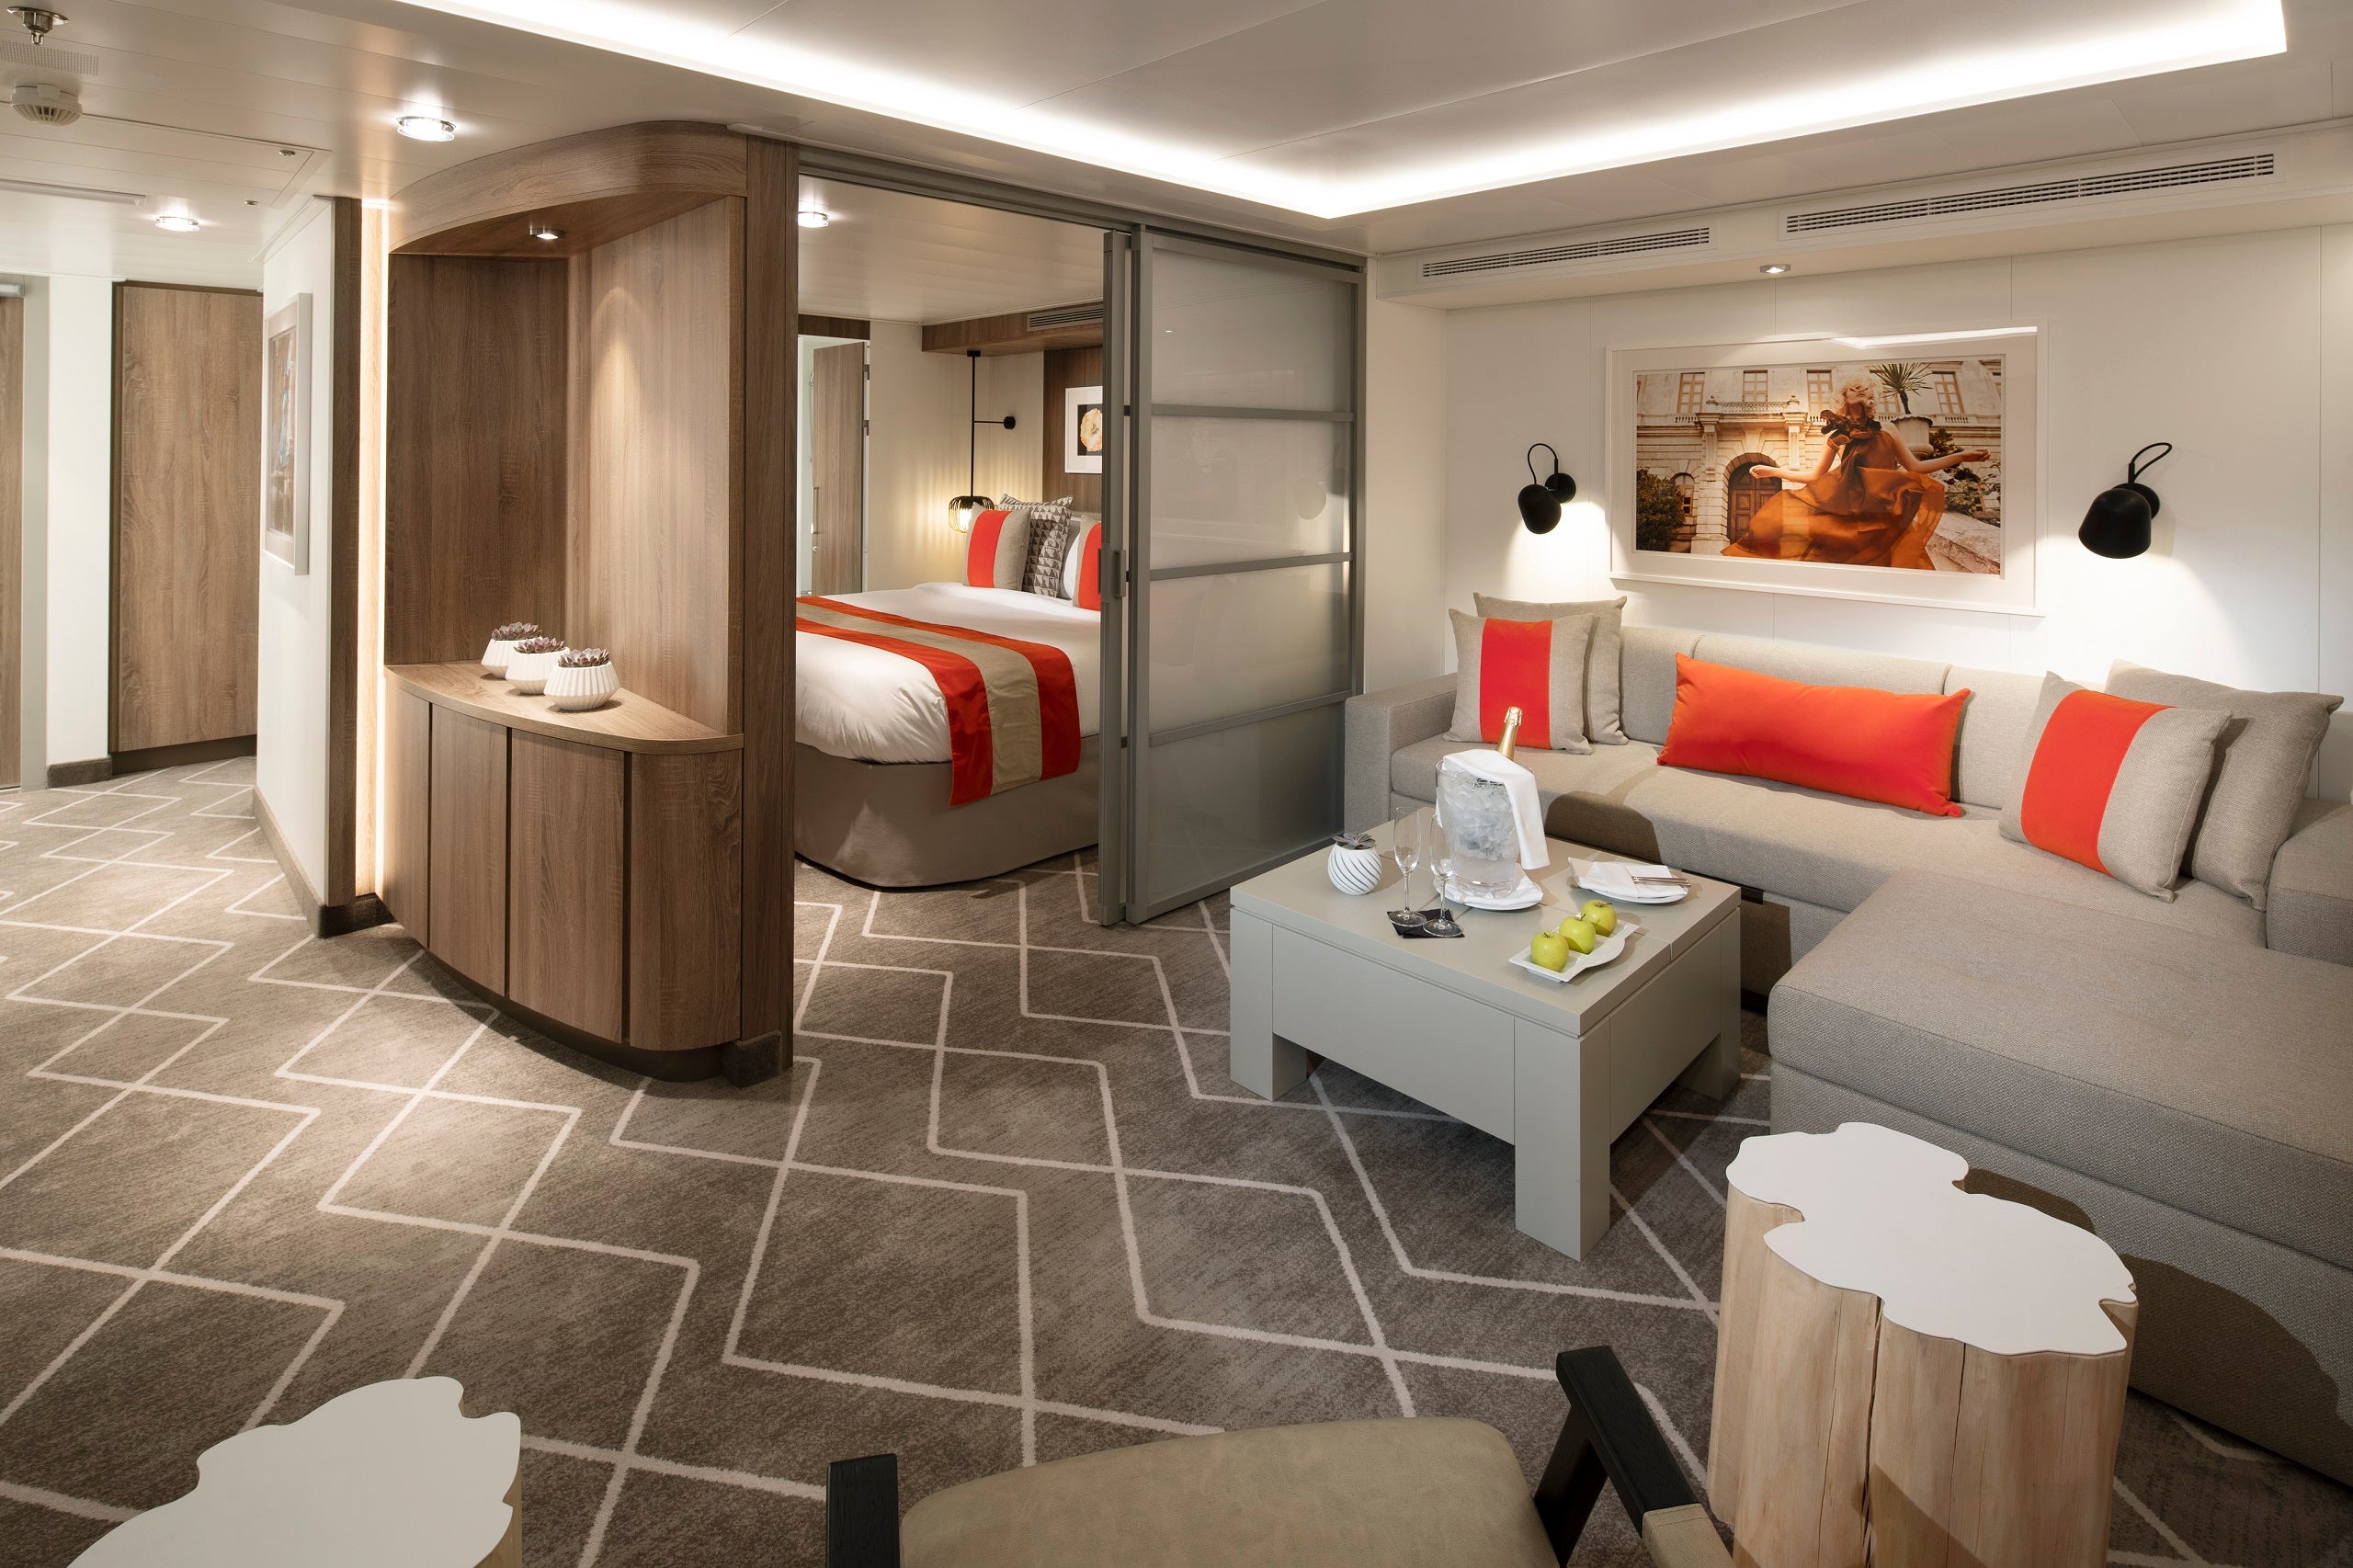 rooms on celebrity cruise ships